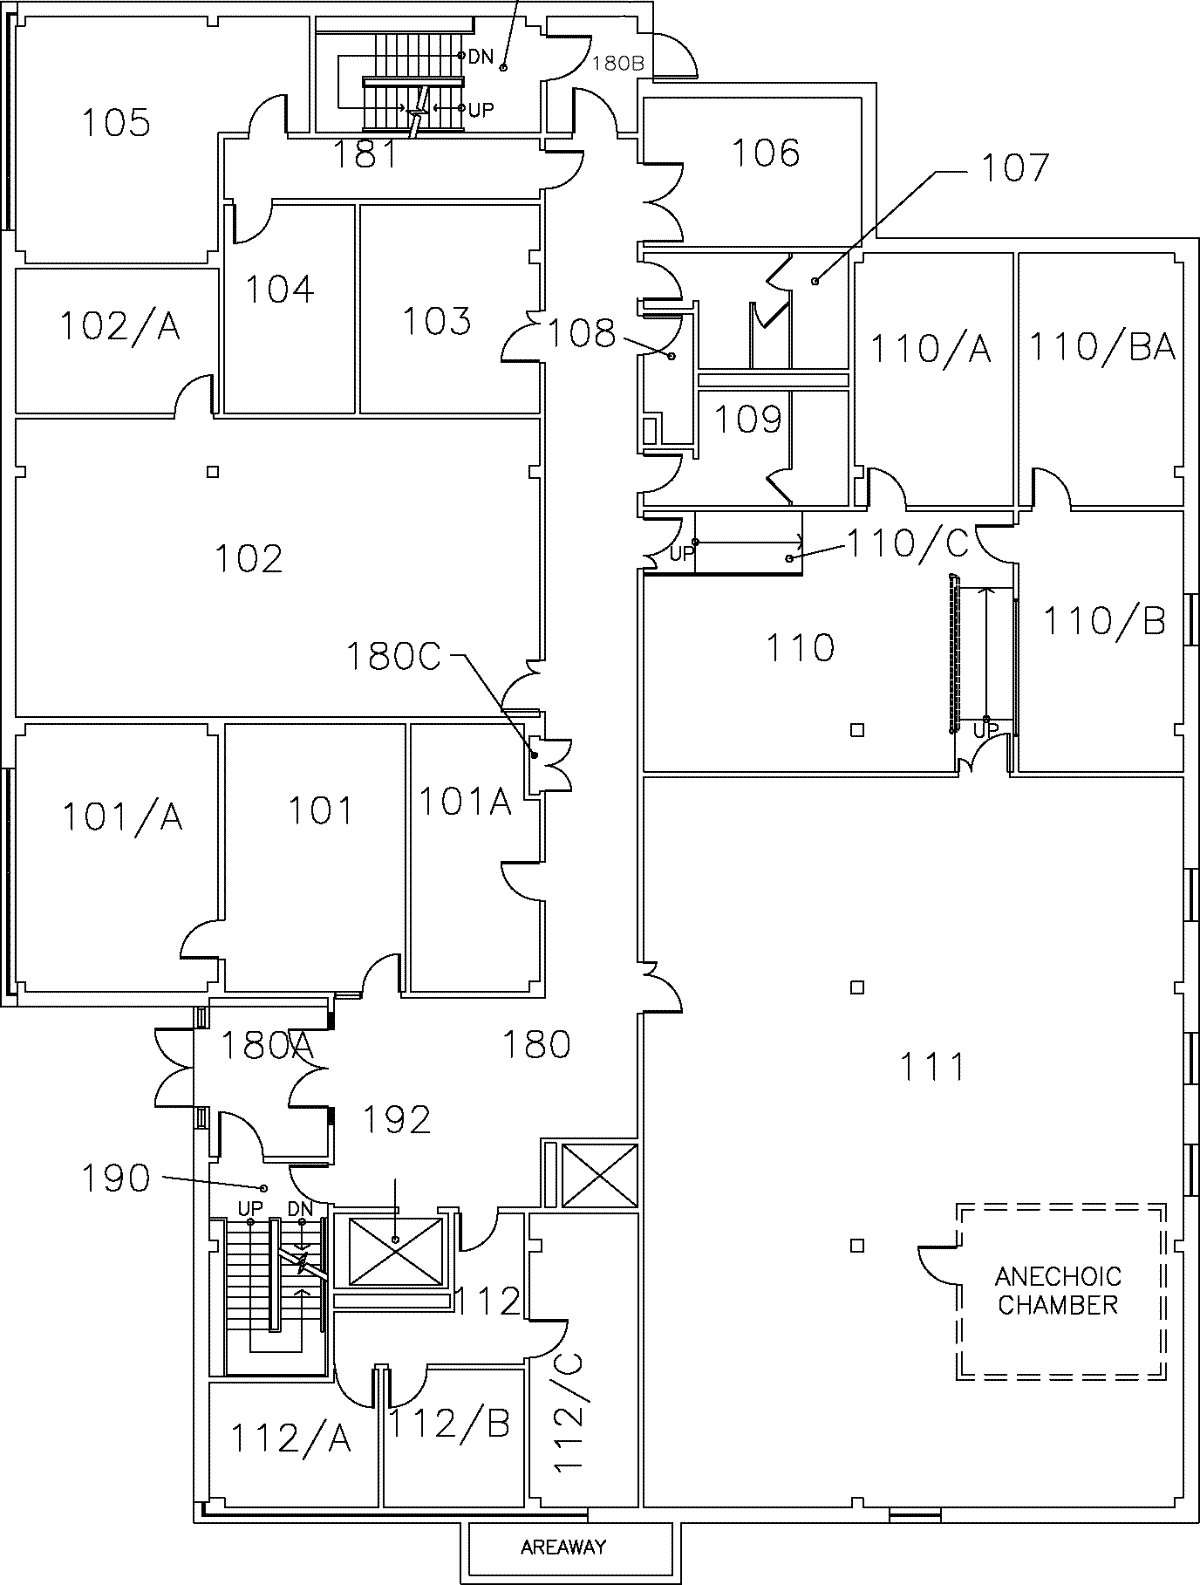 McMaster University Communications Research Laboratory (CRL) - First Floor Map